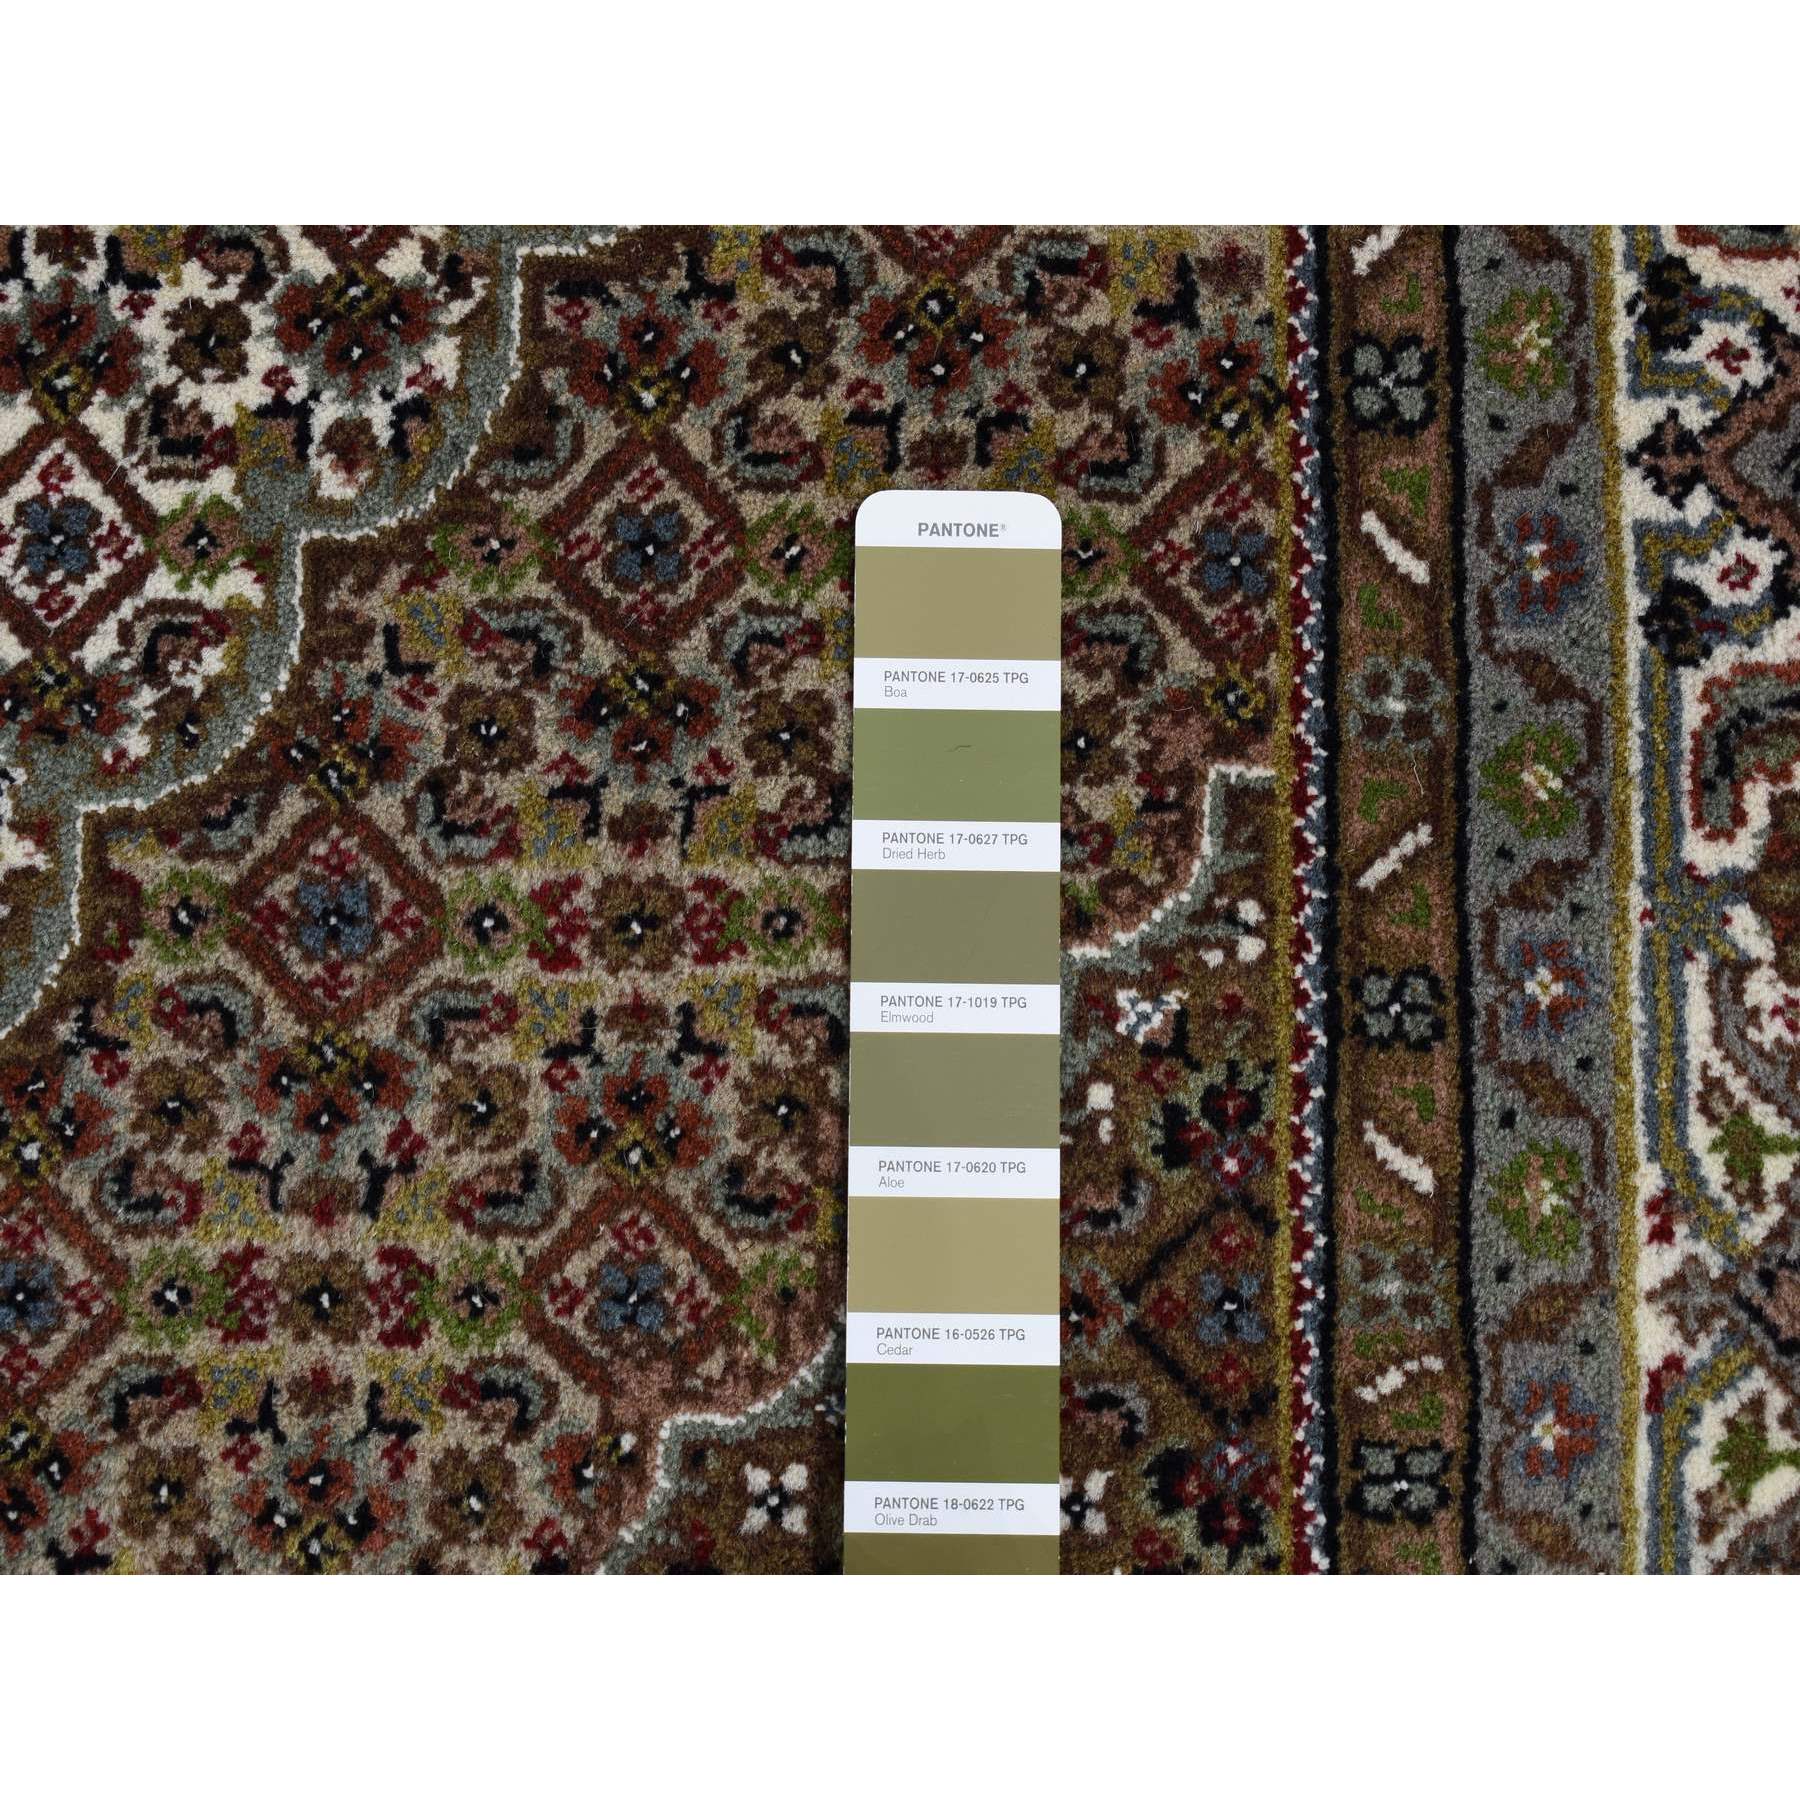 traditional Silk Hand-Knotted Area Rug 4'7